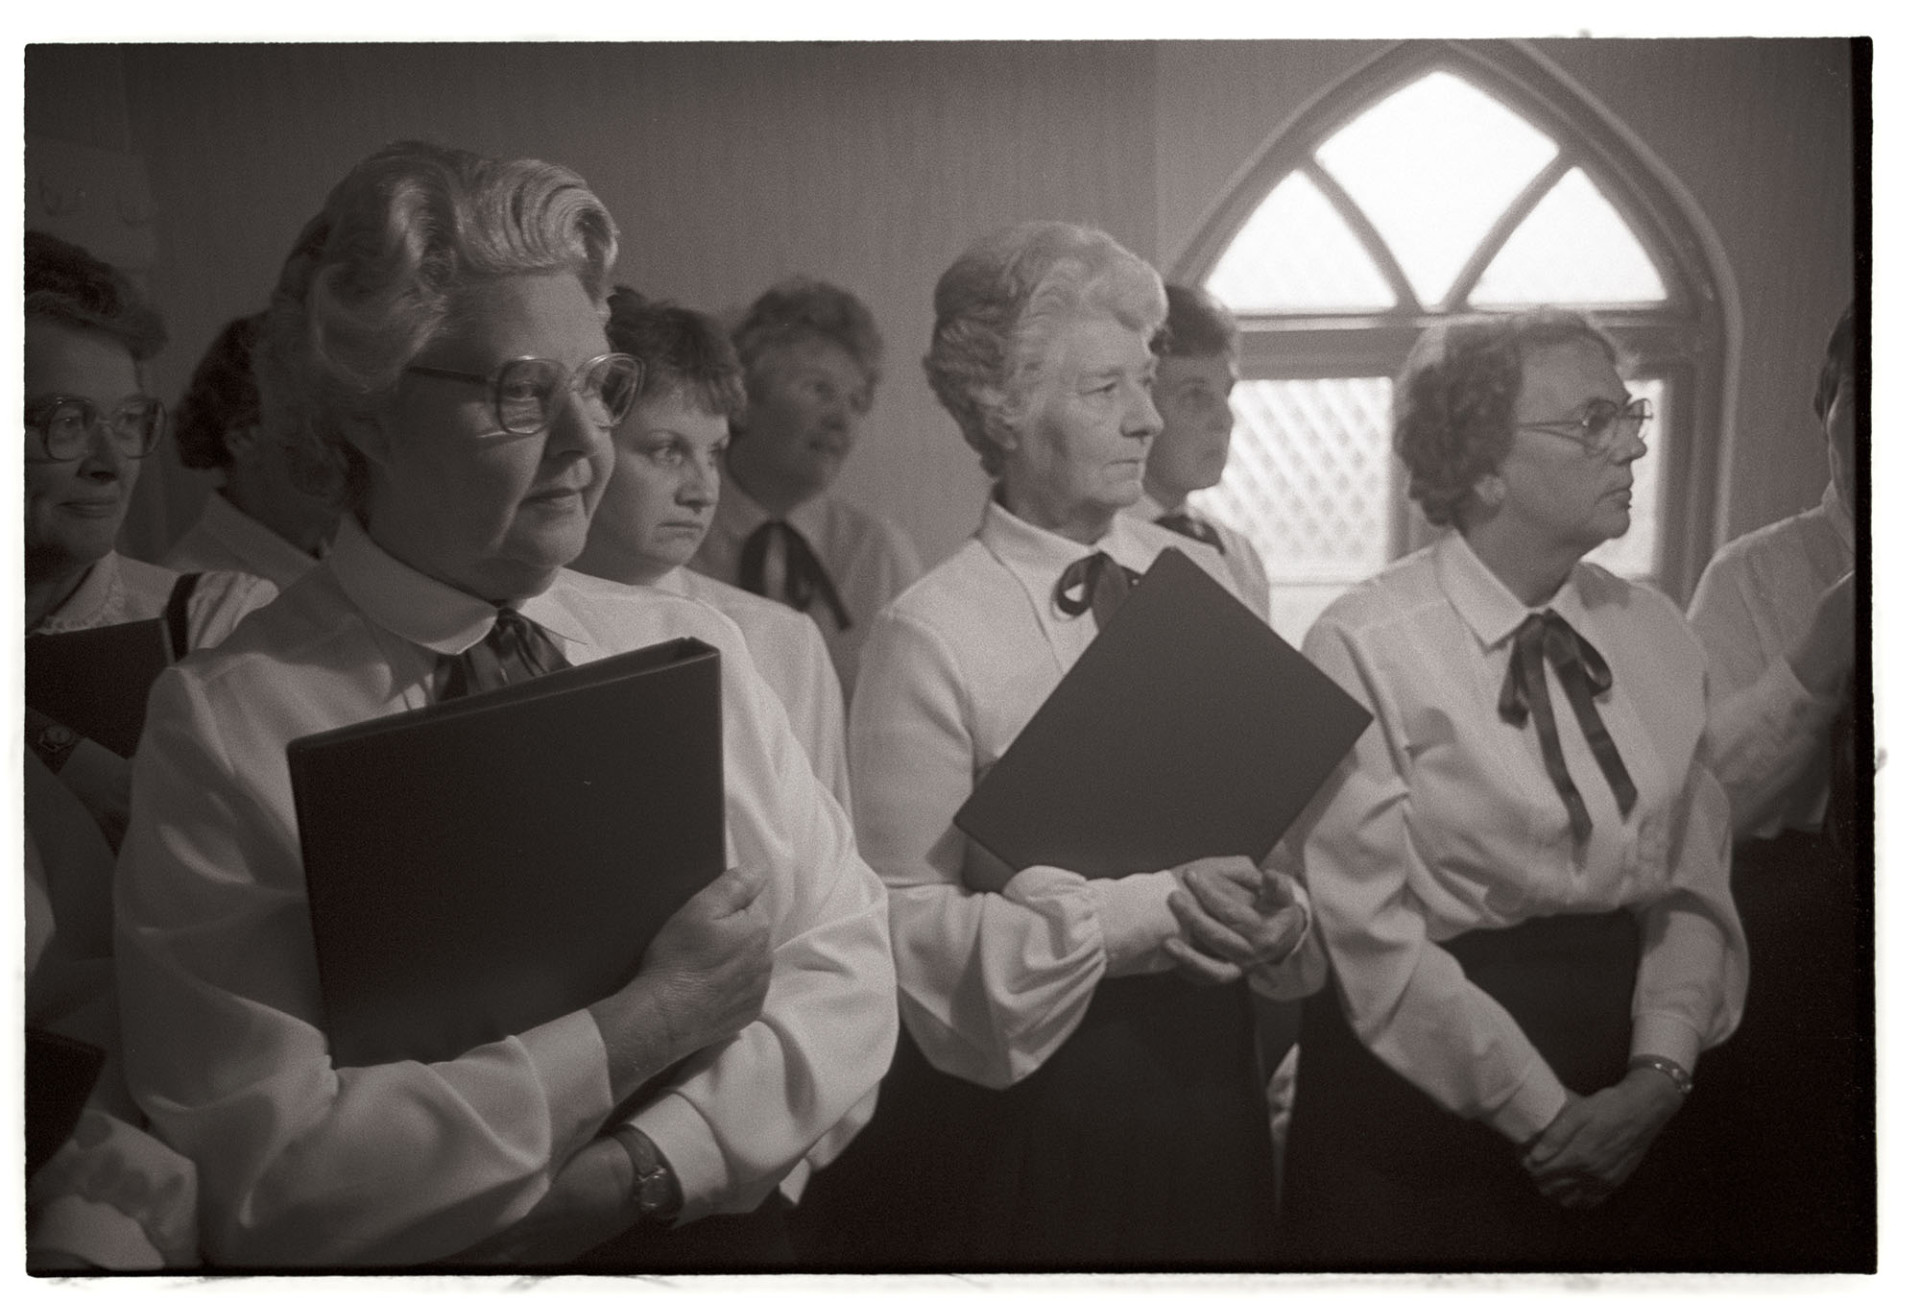 Harvest Festival, women, ladies choir before service. 
[The women of Chulmleigh Congregational Chapel choir before the Harvest Festival service. They are all holding folders with their music.]